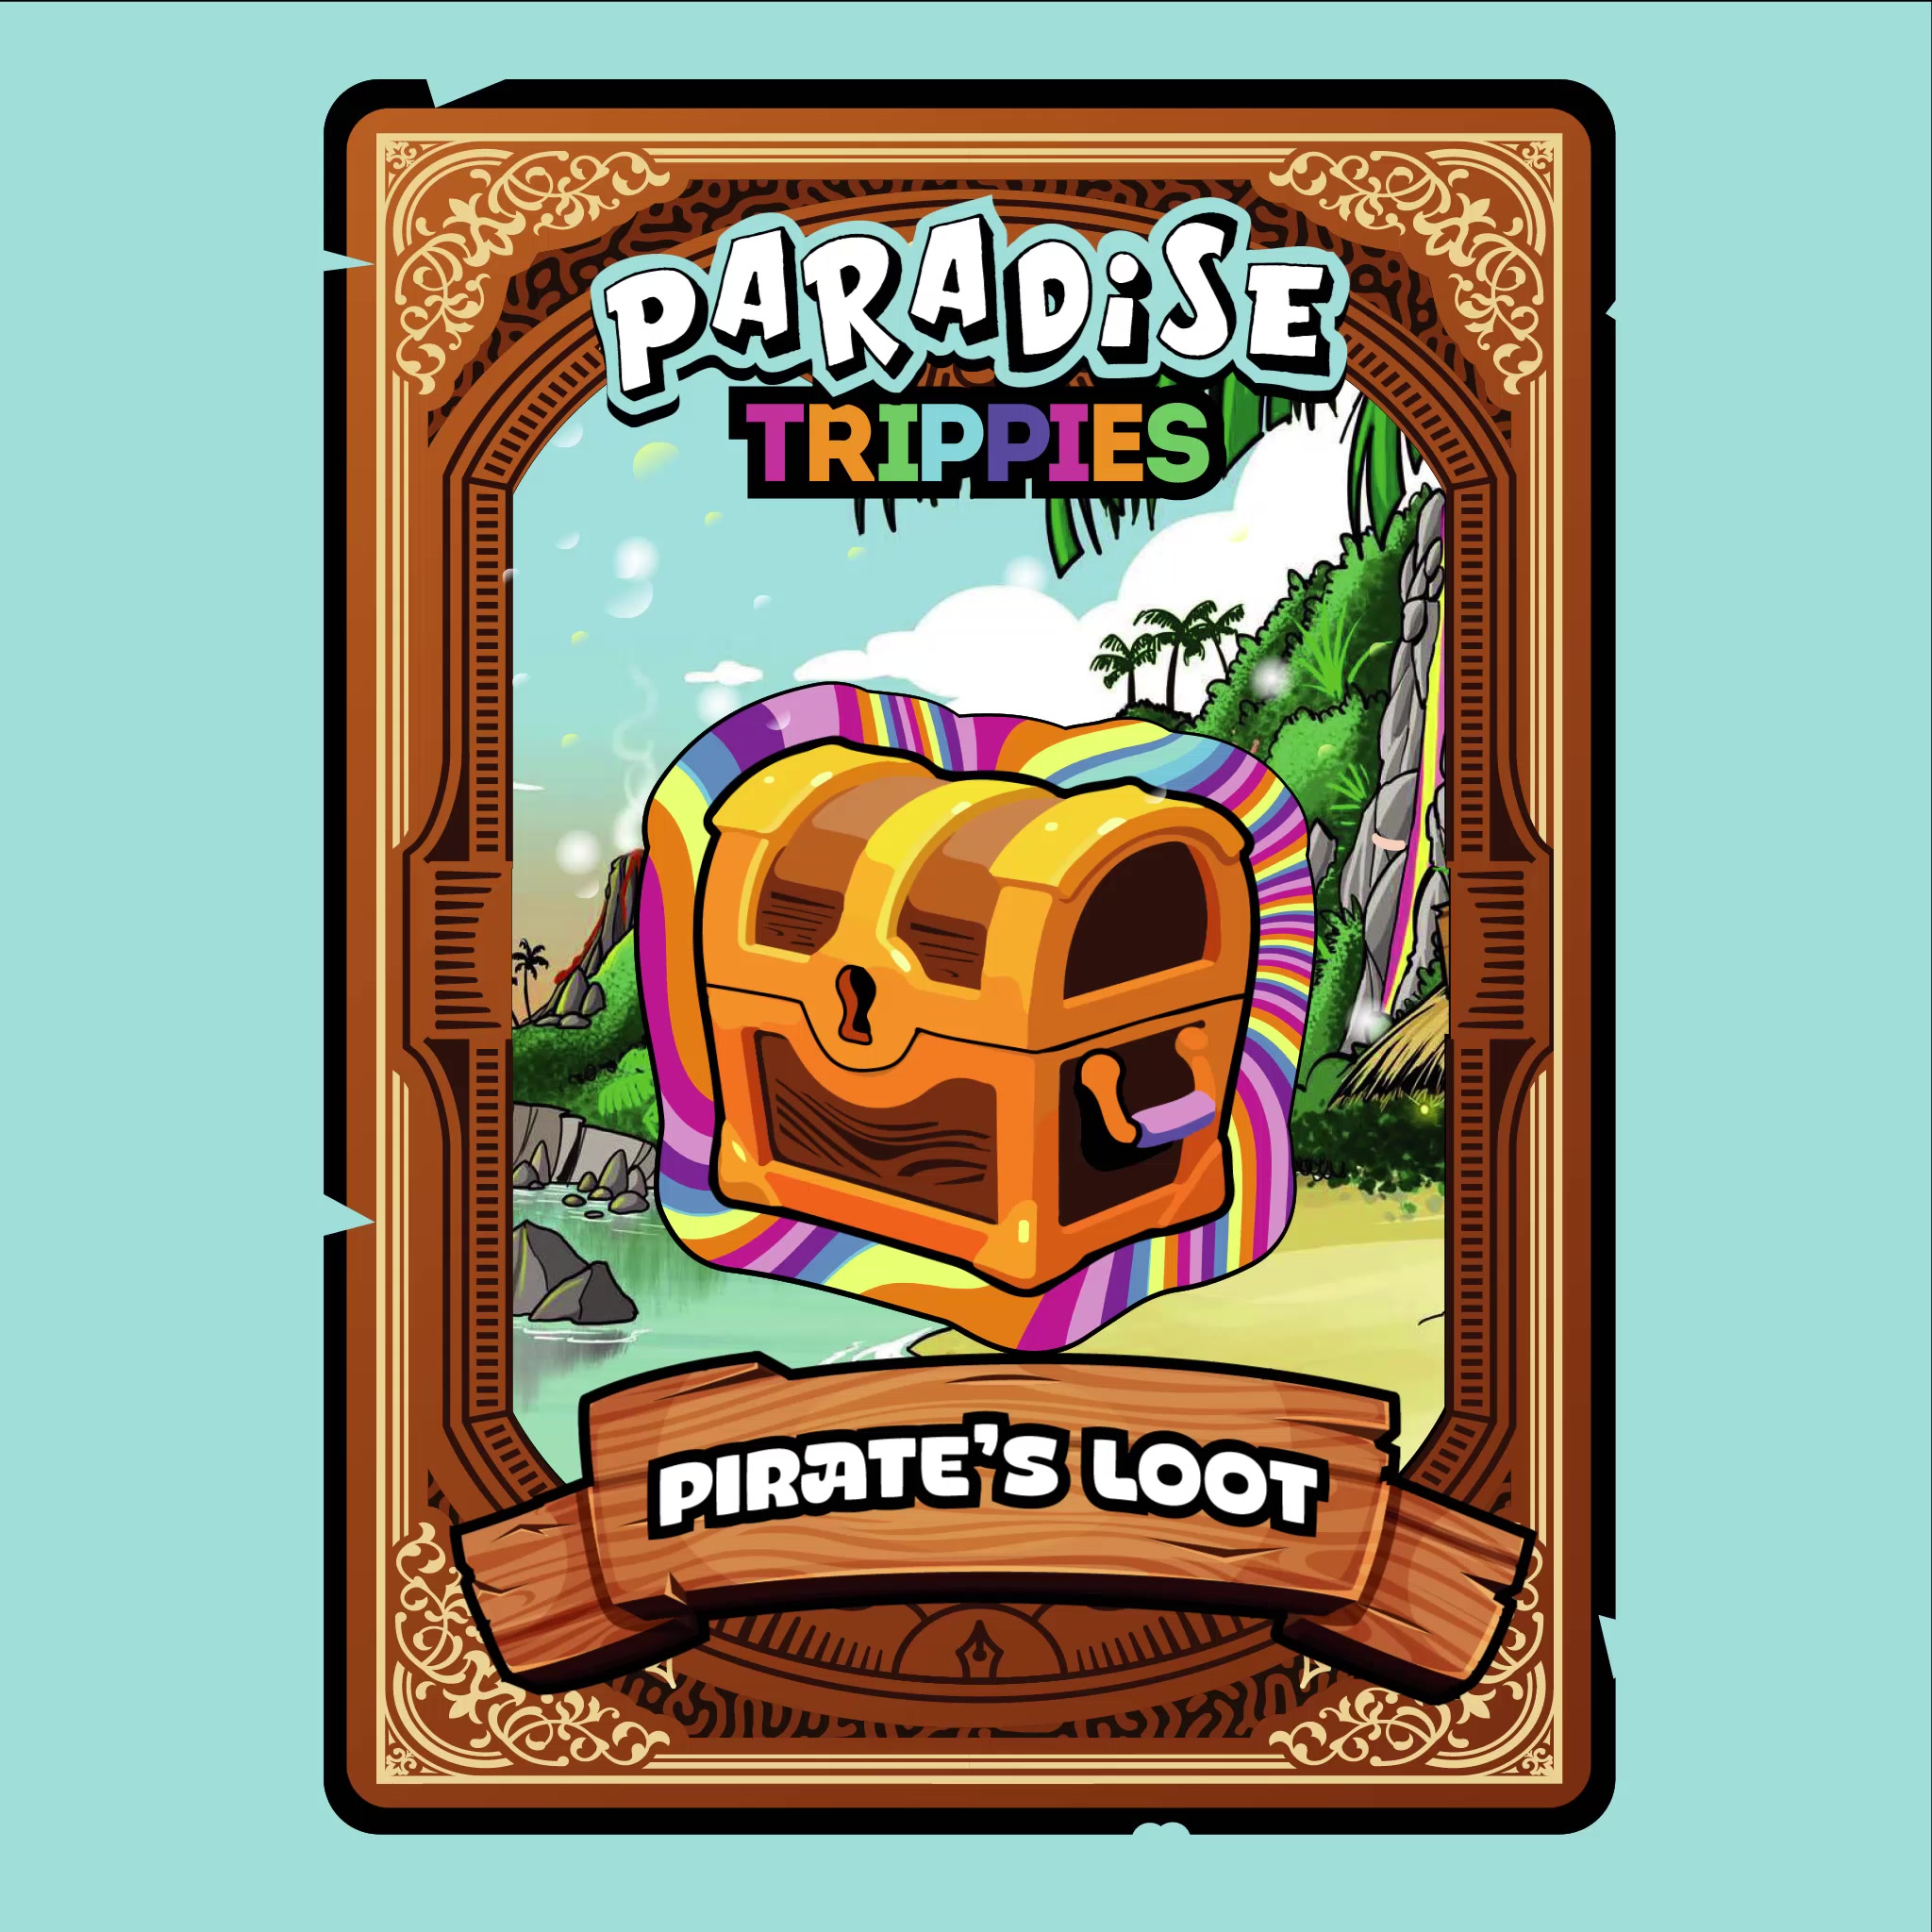 Trippies Pirate's Loot